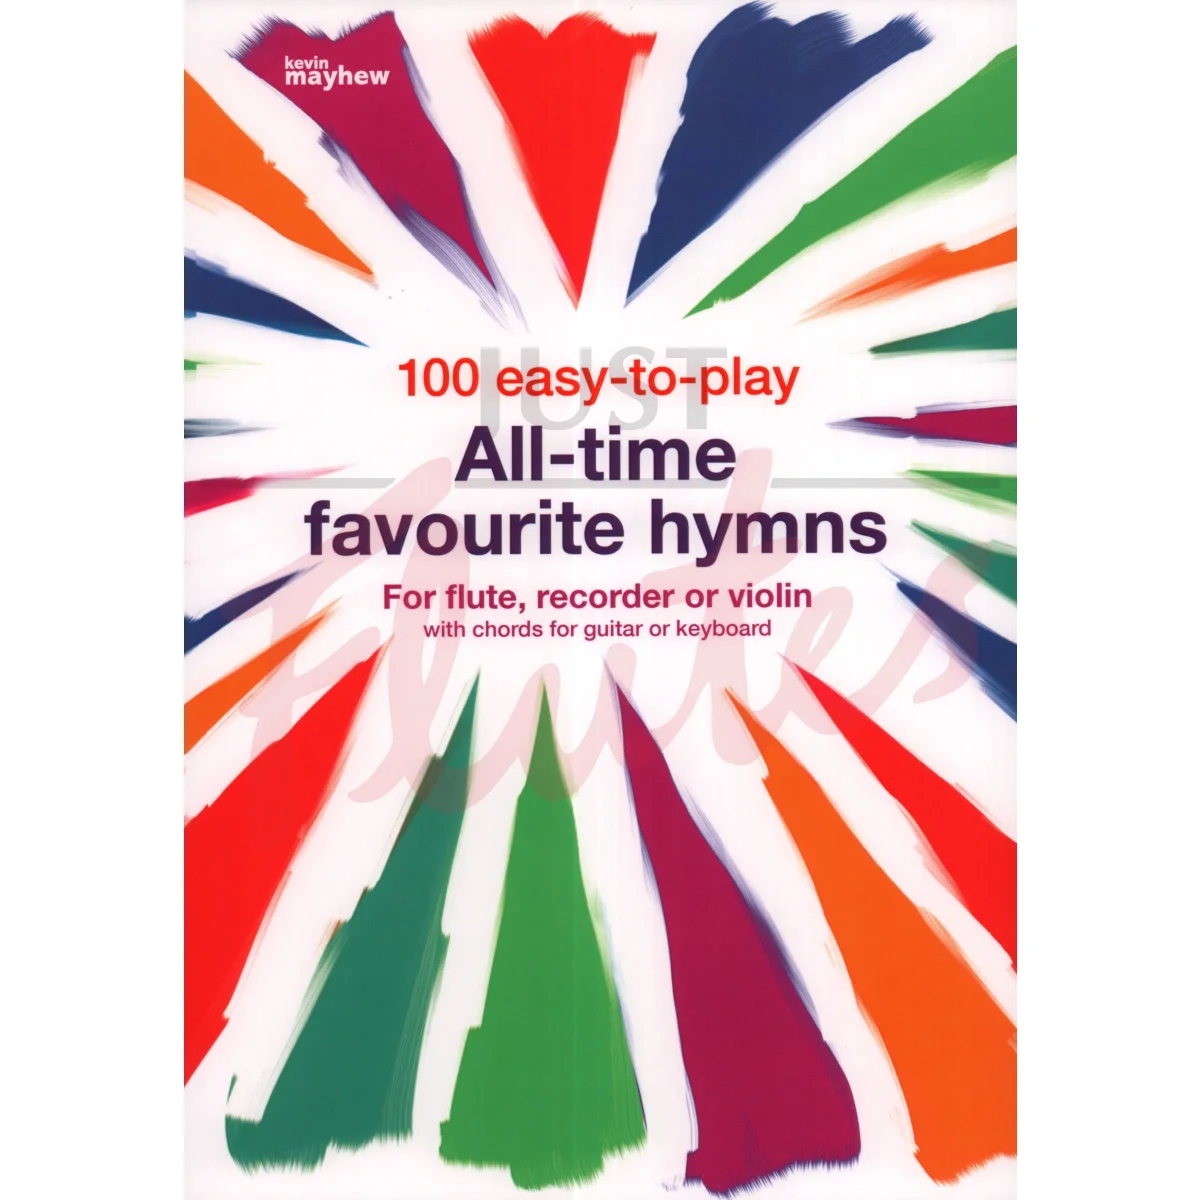 100 Easy-To-Play All-Time Favourite Hymns [C Instruments]